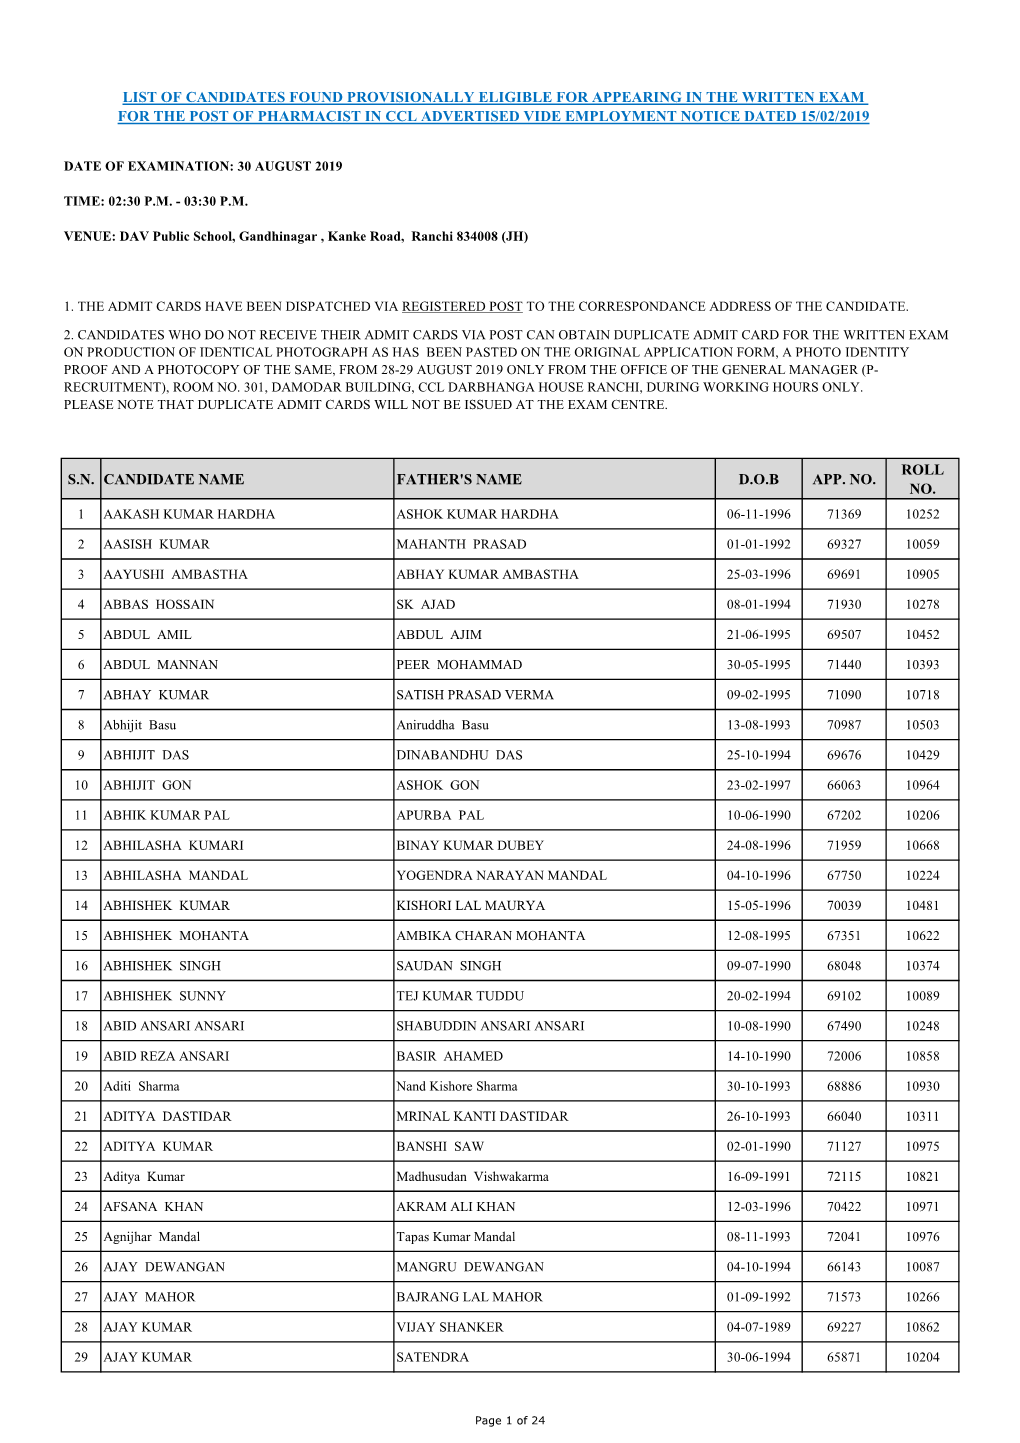 List of Candidates Found Provisionally Eligible for Appearing in the Written Exam for the Post of Pharmacist in Ccl Advertised Vide Employment Notice Dated 15/02/2019